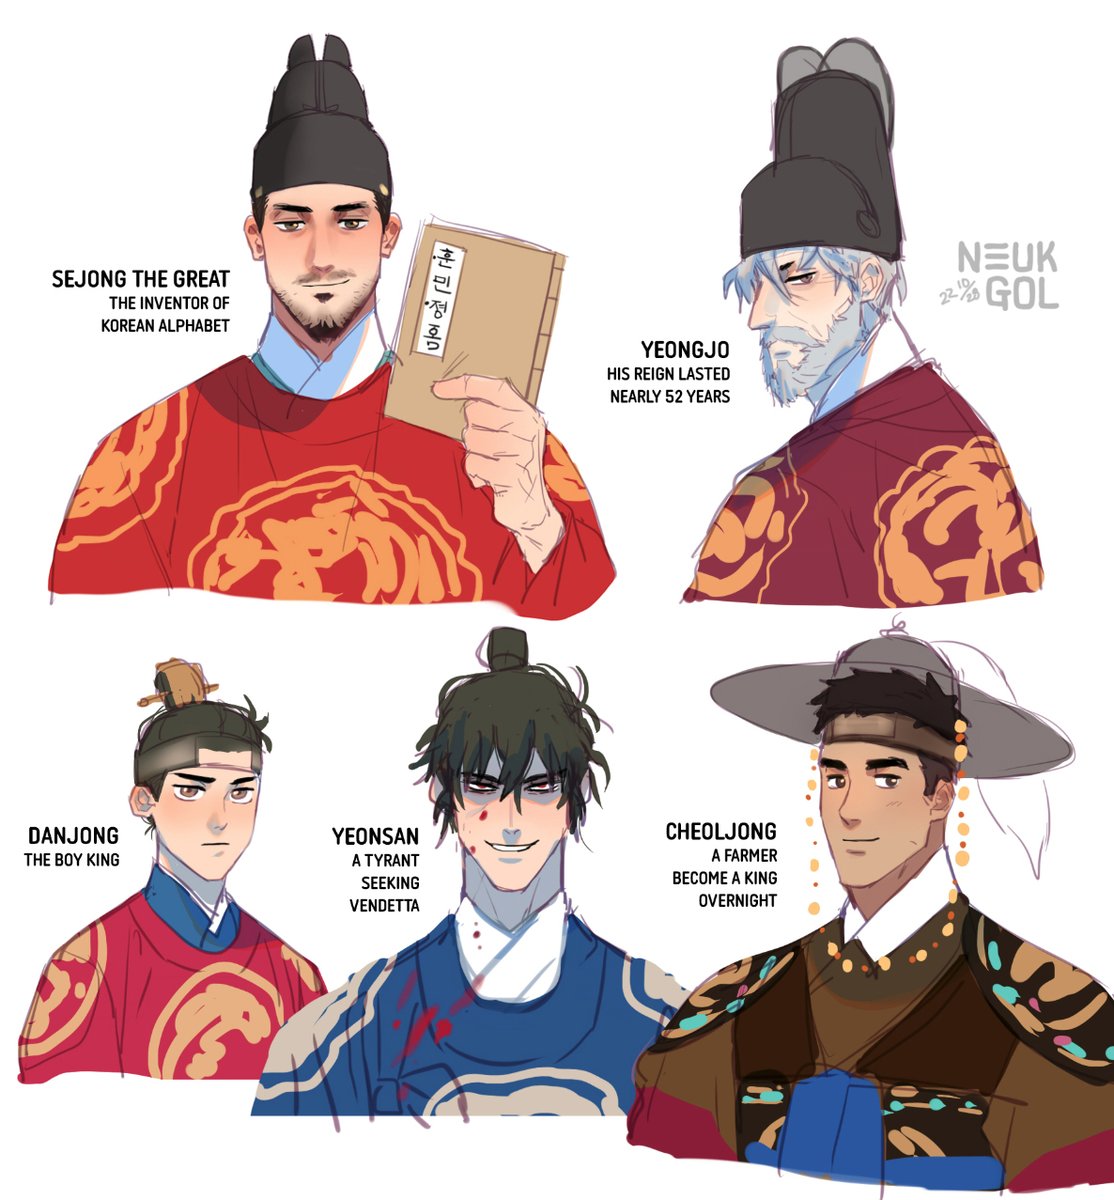 I jokingly drew some of iconic joseon dynasty kings after I saw some handsome sejong(??) art on the internet... 